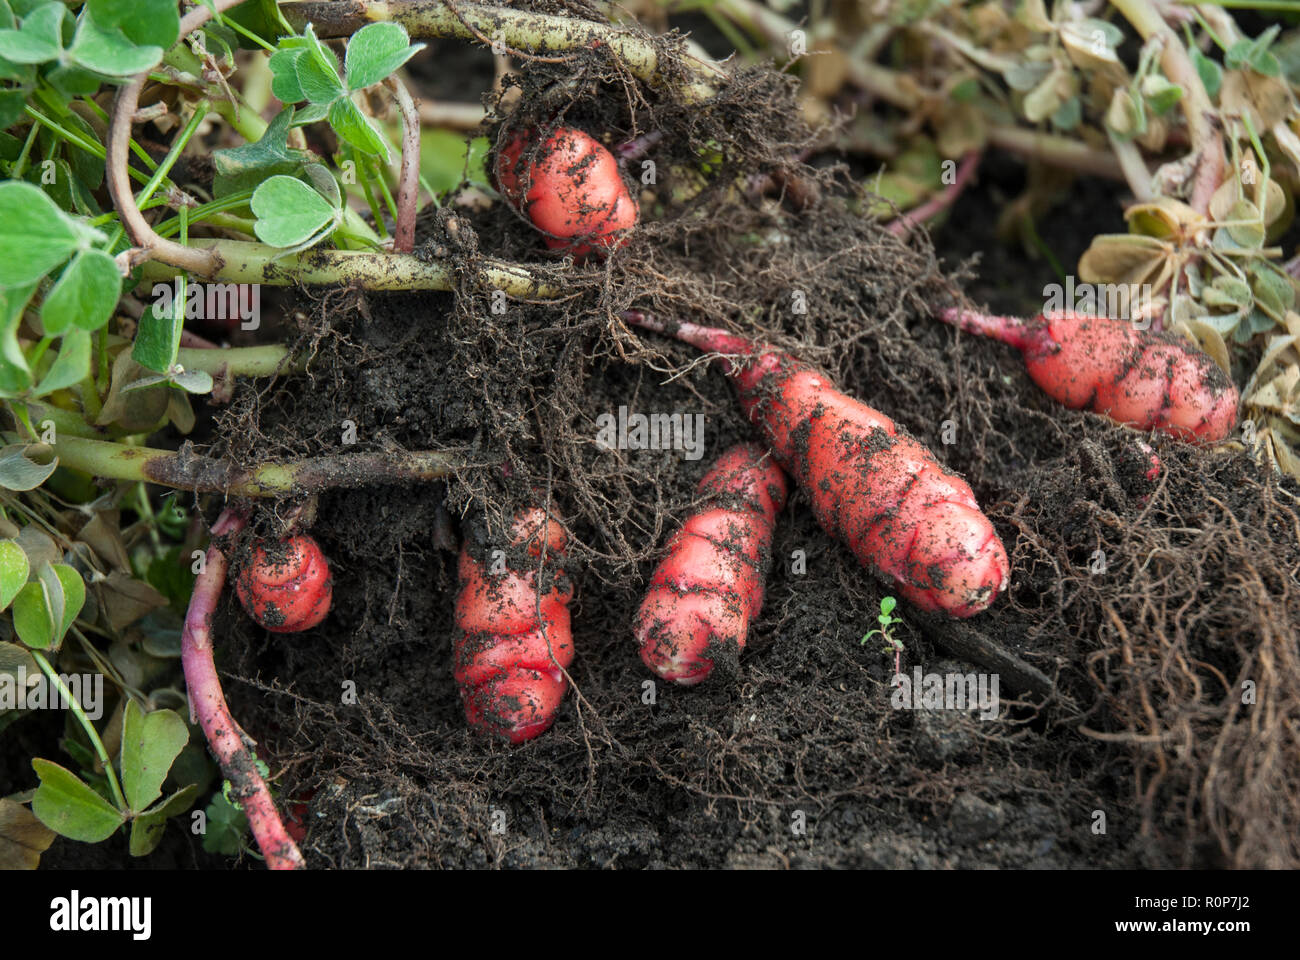 Tubers of bright pink/ red New Zealand yam, oca or oxalis tuberosa being harvested from the ground with foliage and root system. (Instructional ) Stock Photo